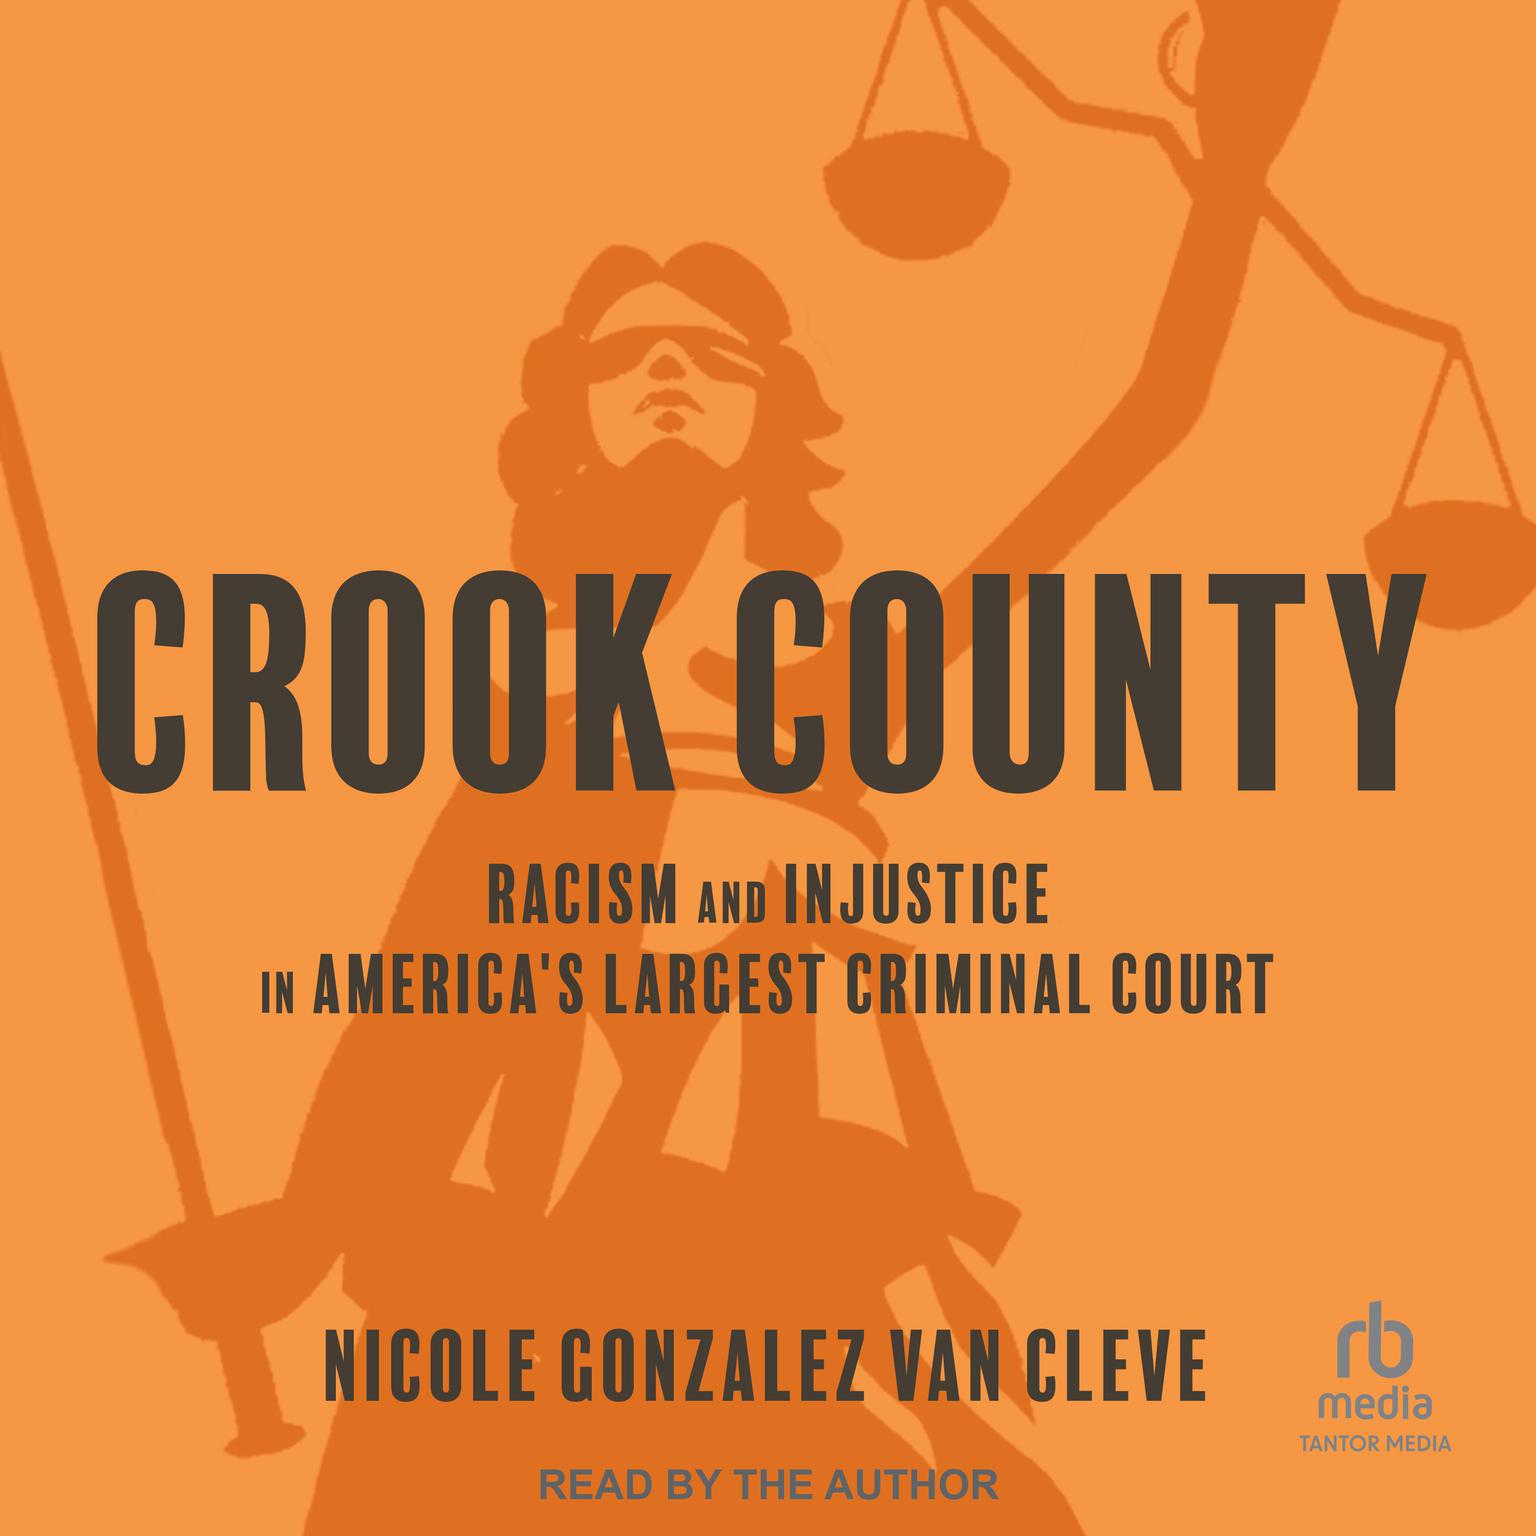 Crook County: Racism and Injustice in Americas Largest Criminal Court Audiobook, by Nicole Gonzalez Van Cleve